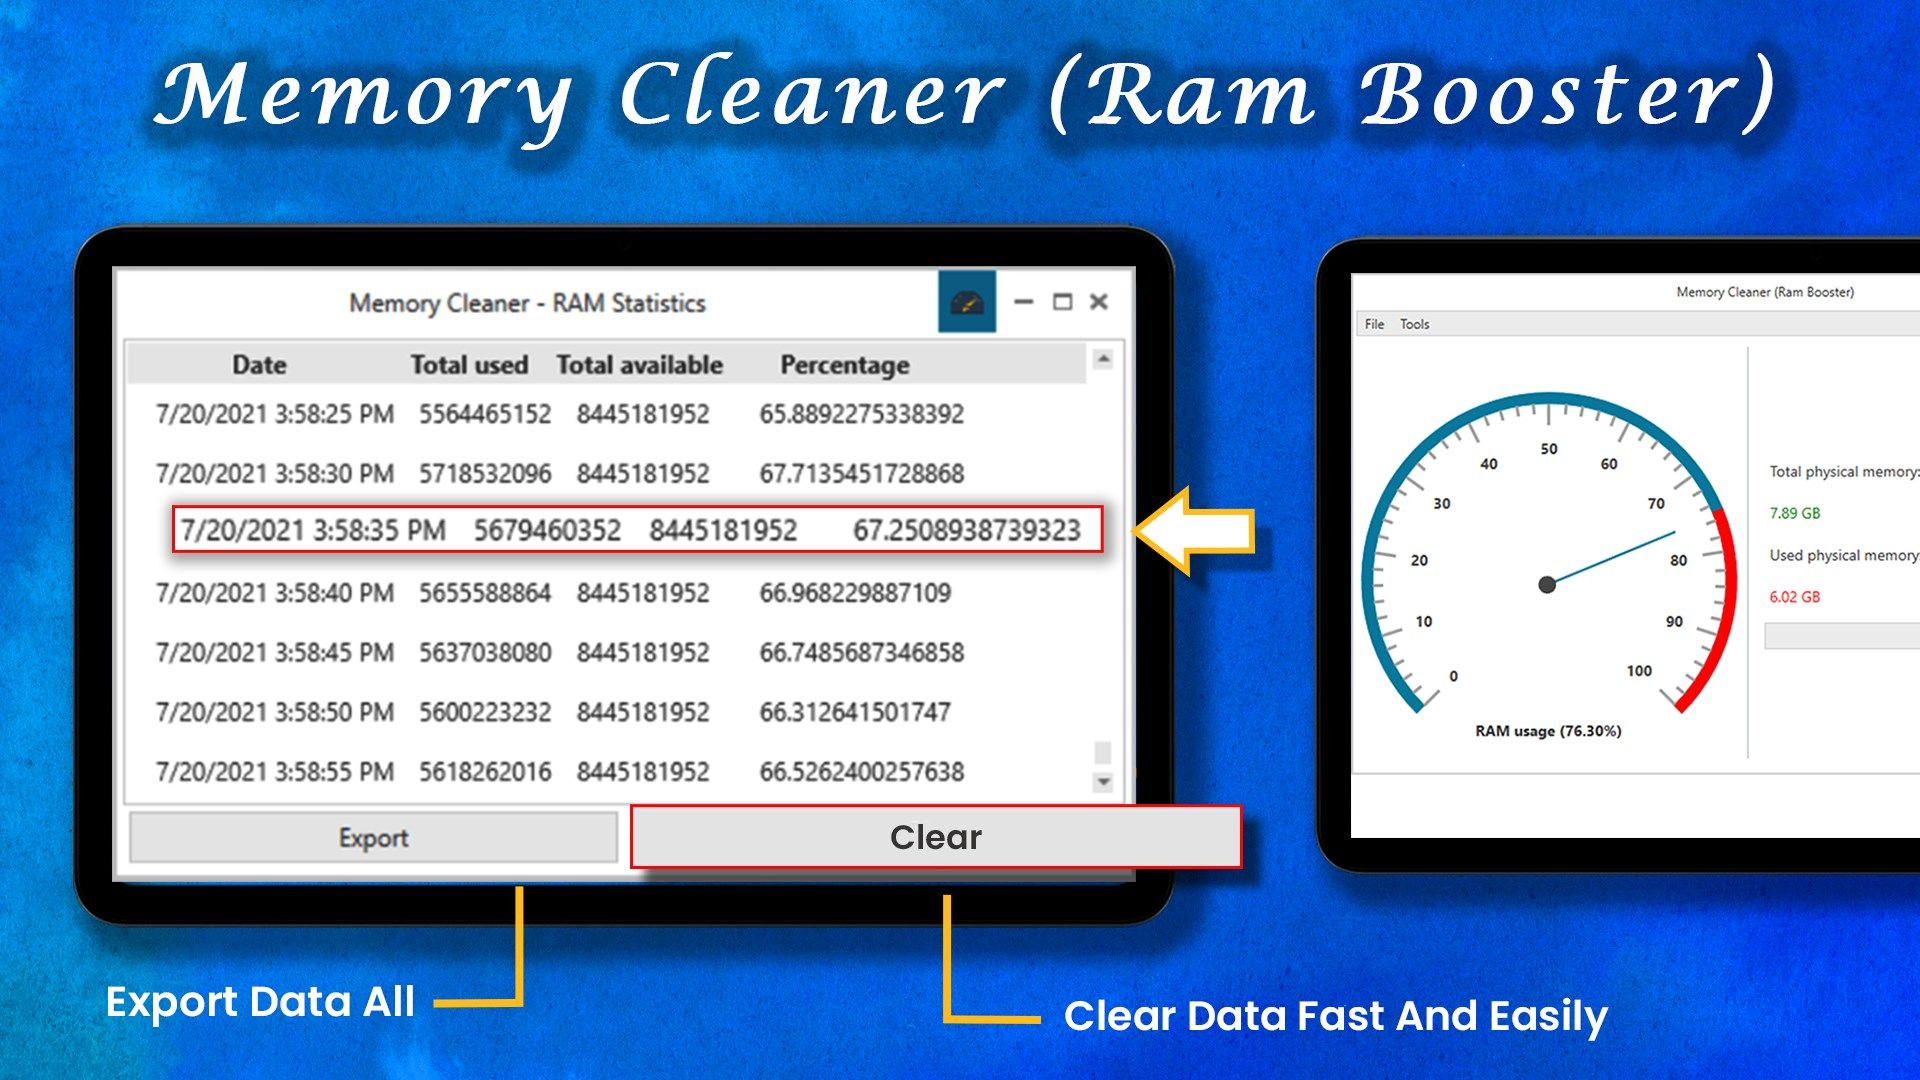 Ram Booster: Memory Cleaner Game Booster